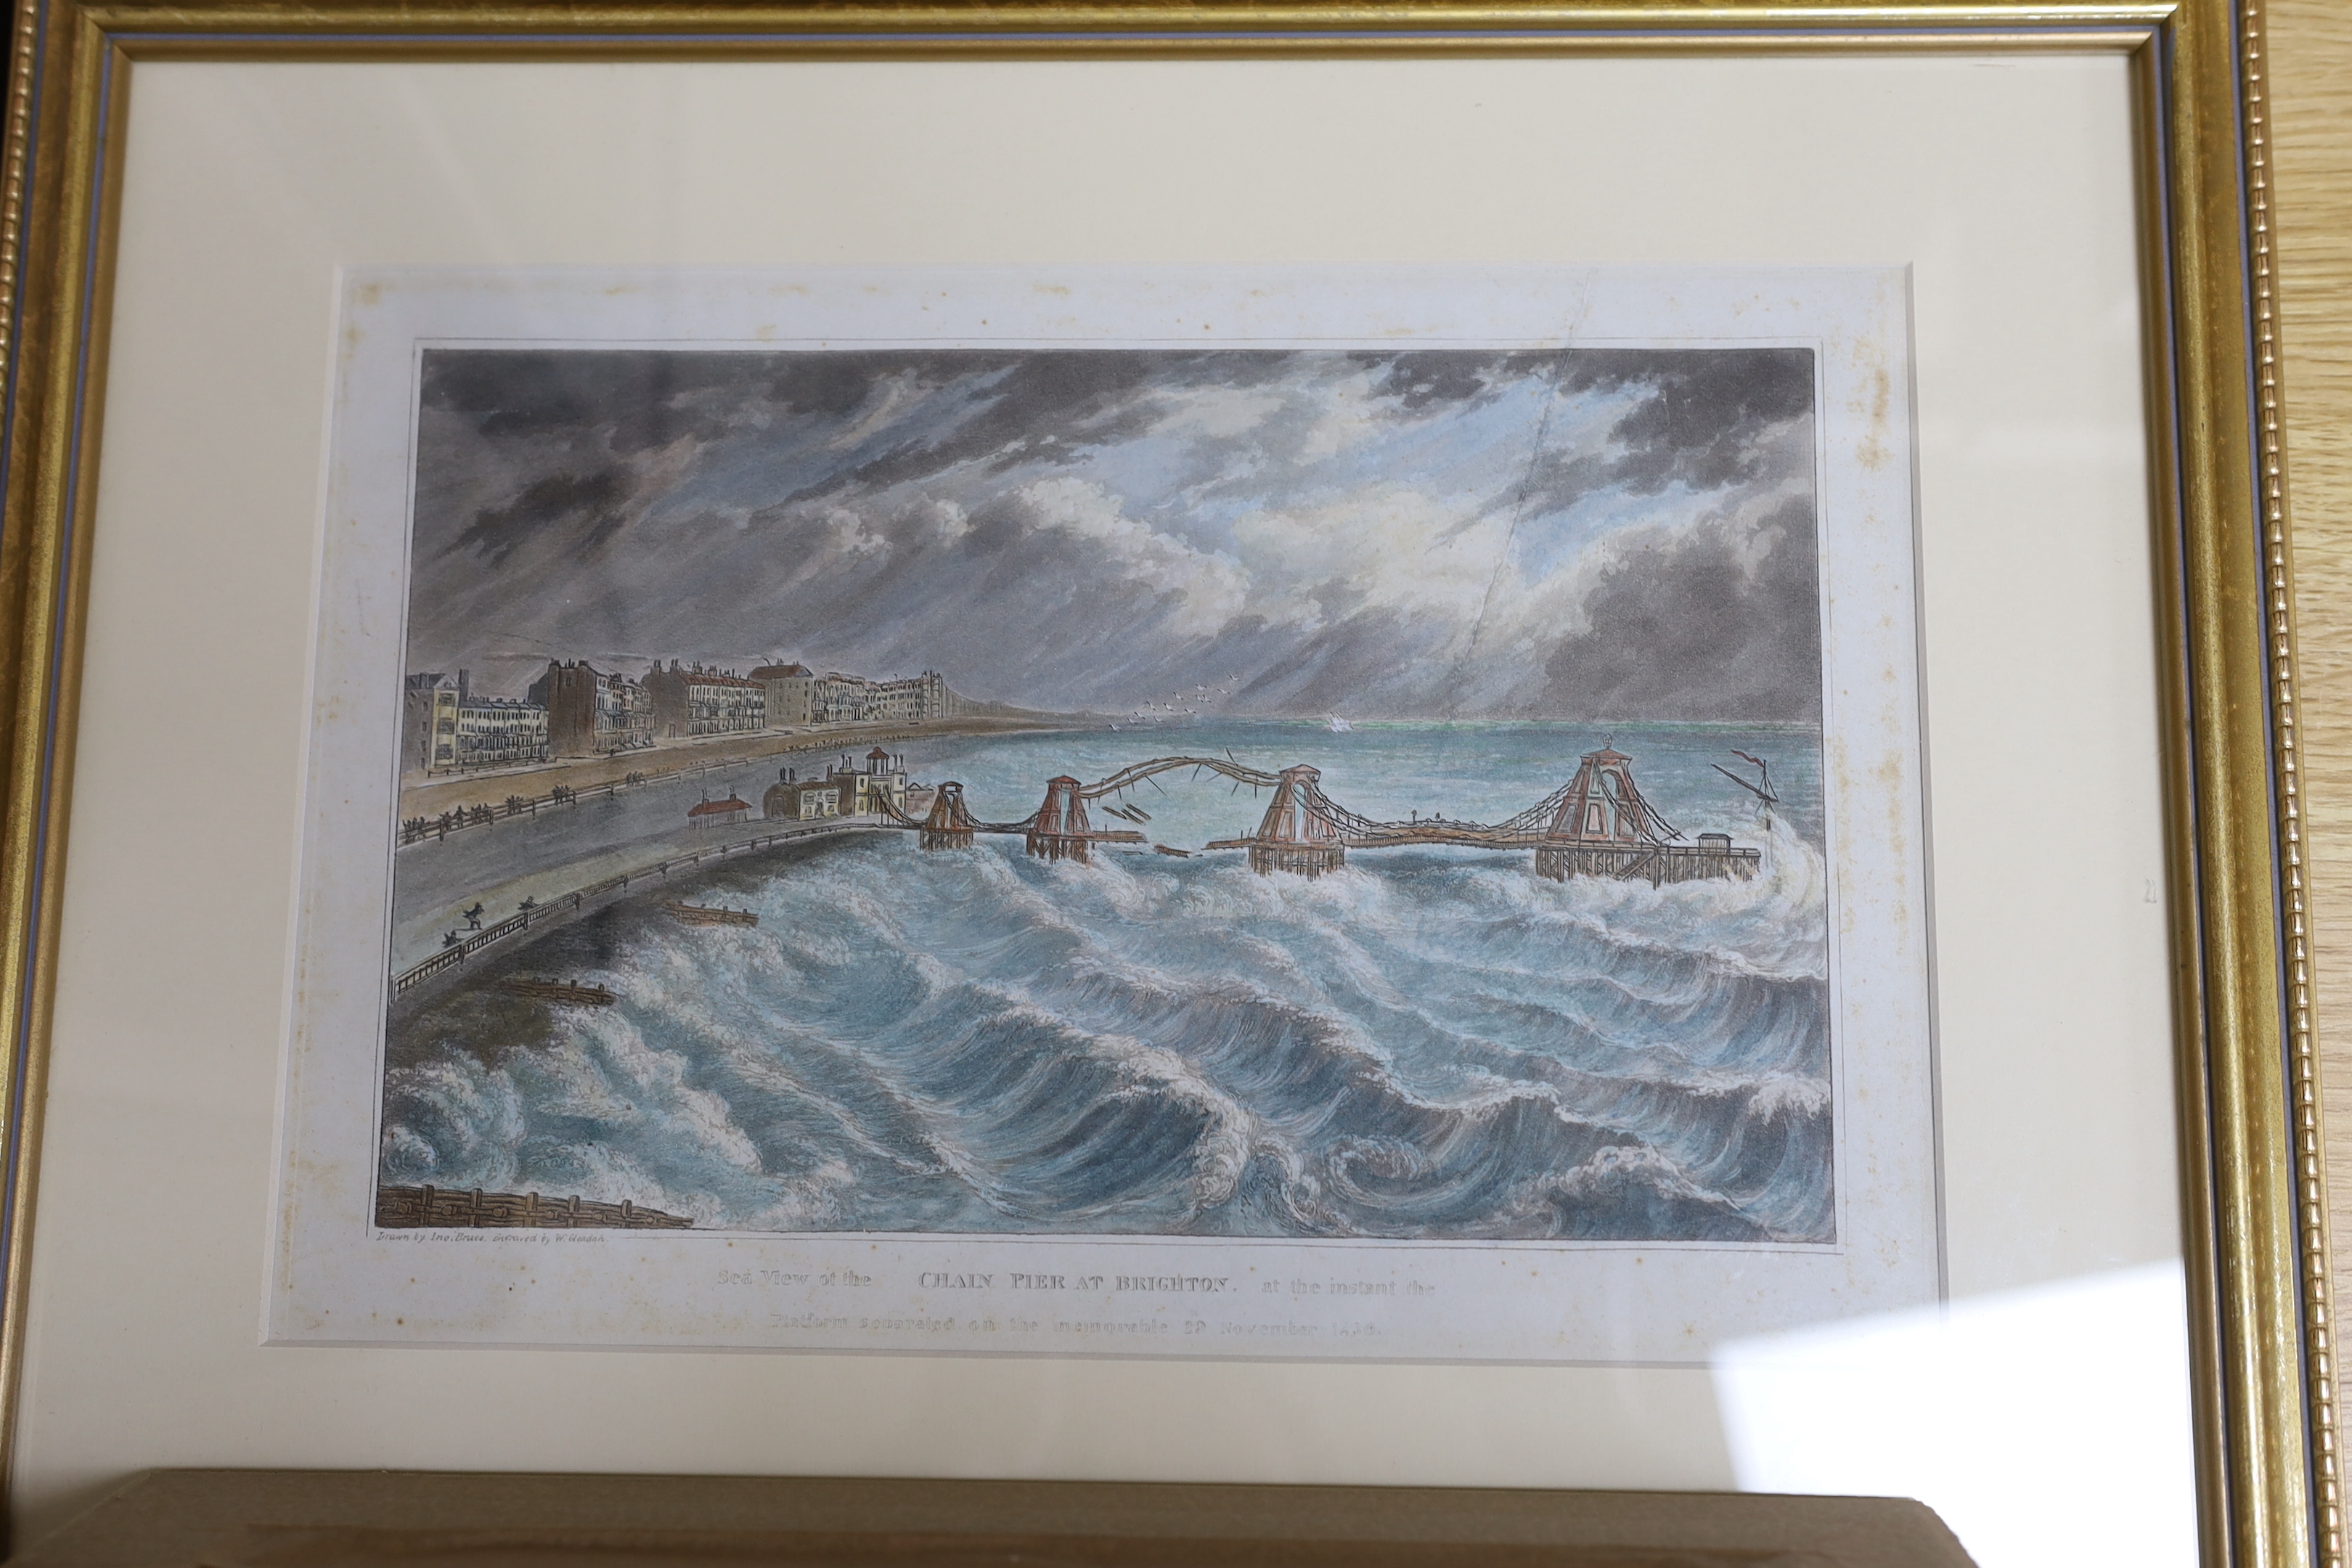 Four 19th century engravings and prints of Brighton Piers, some hand coloured including, ‘Chain Pier at the instant the platform separated on the memorable 29th November 1836’ and ‘New pier & parade’, publ. Newman, toget